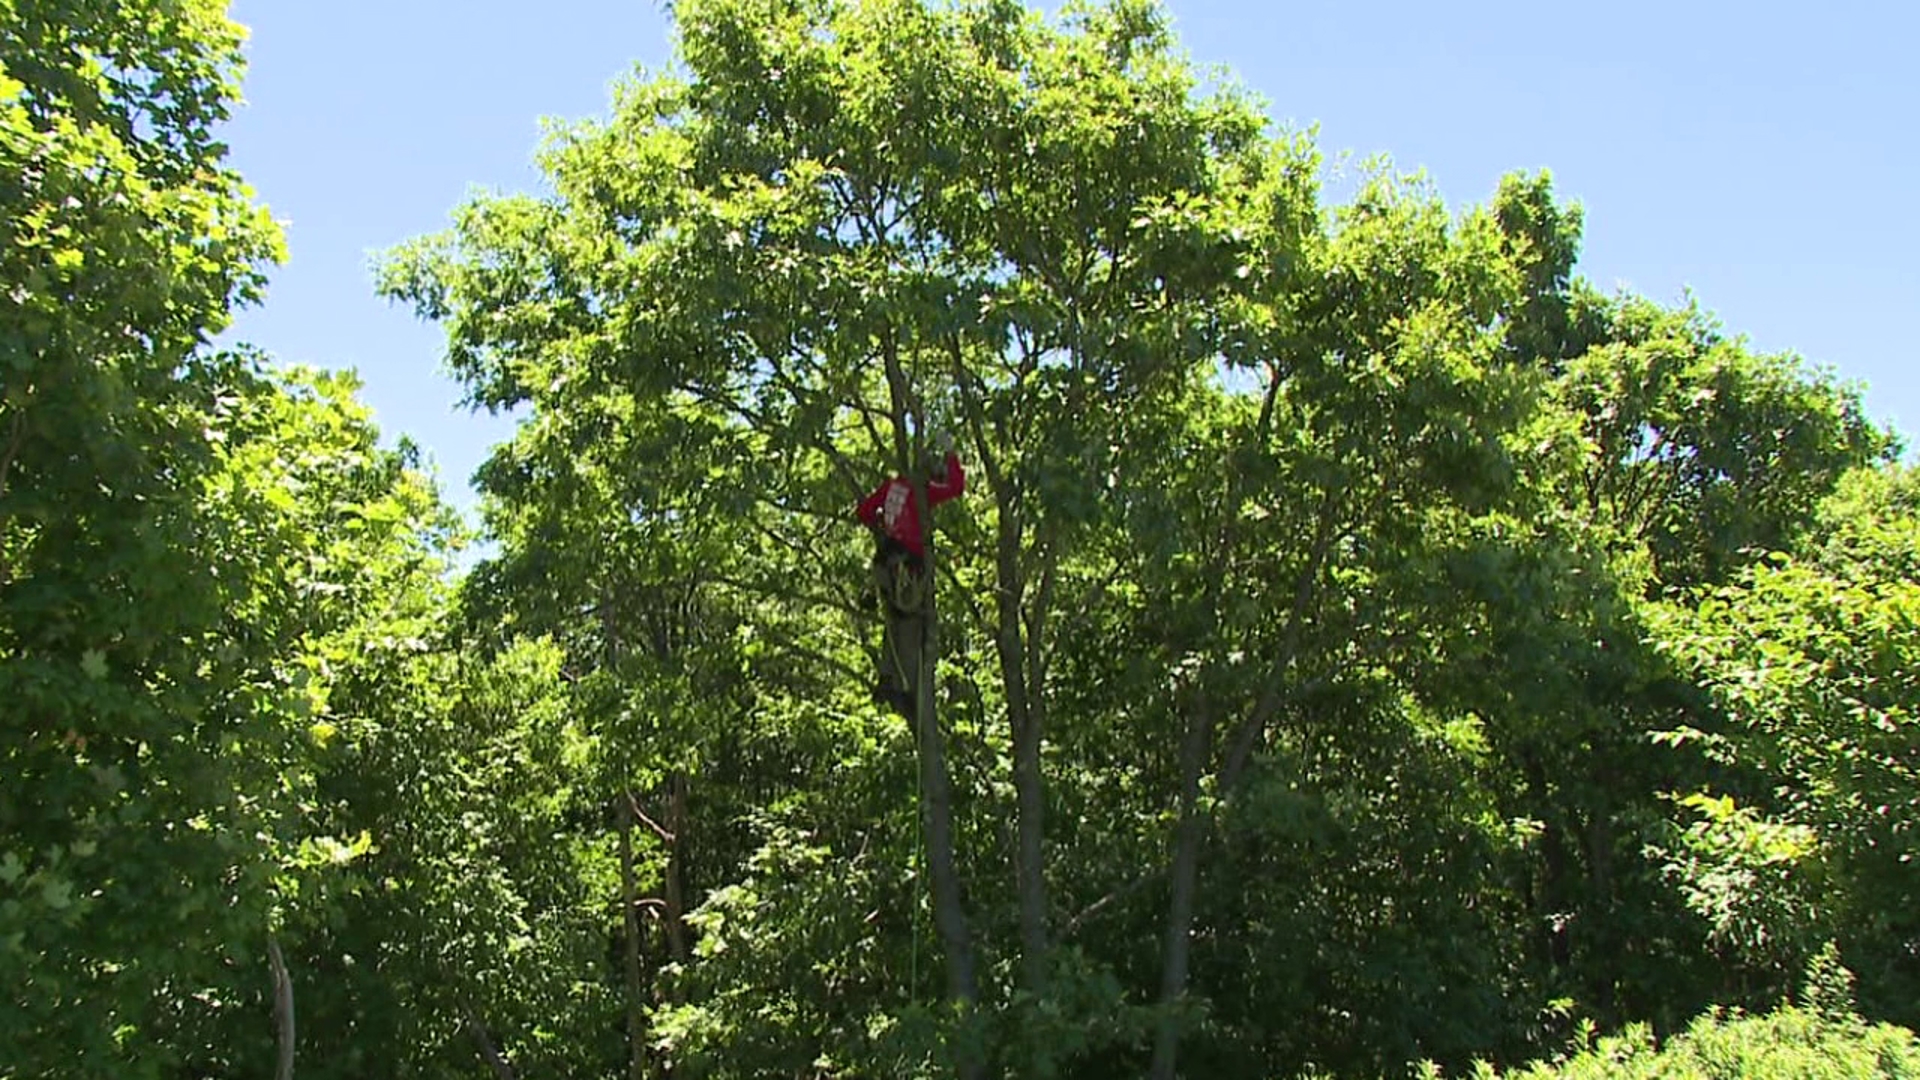 Van Wagner from central Pennsylvania has a mission to climb the tallest trees in every county in the commonwealth to raise awareness.